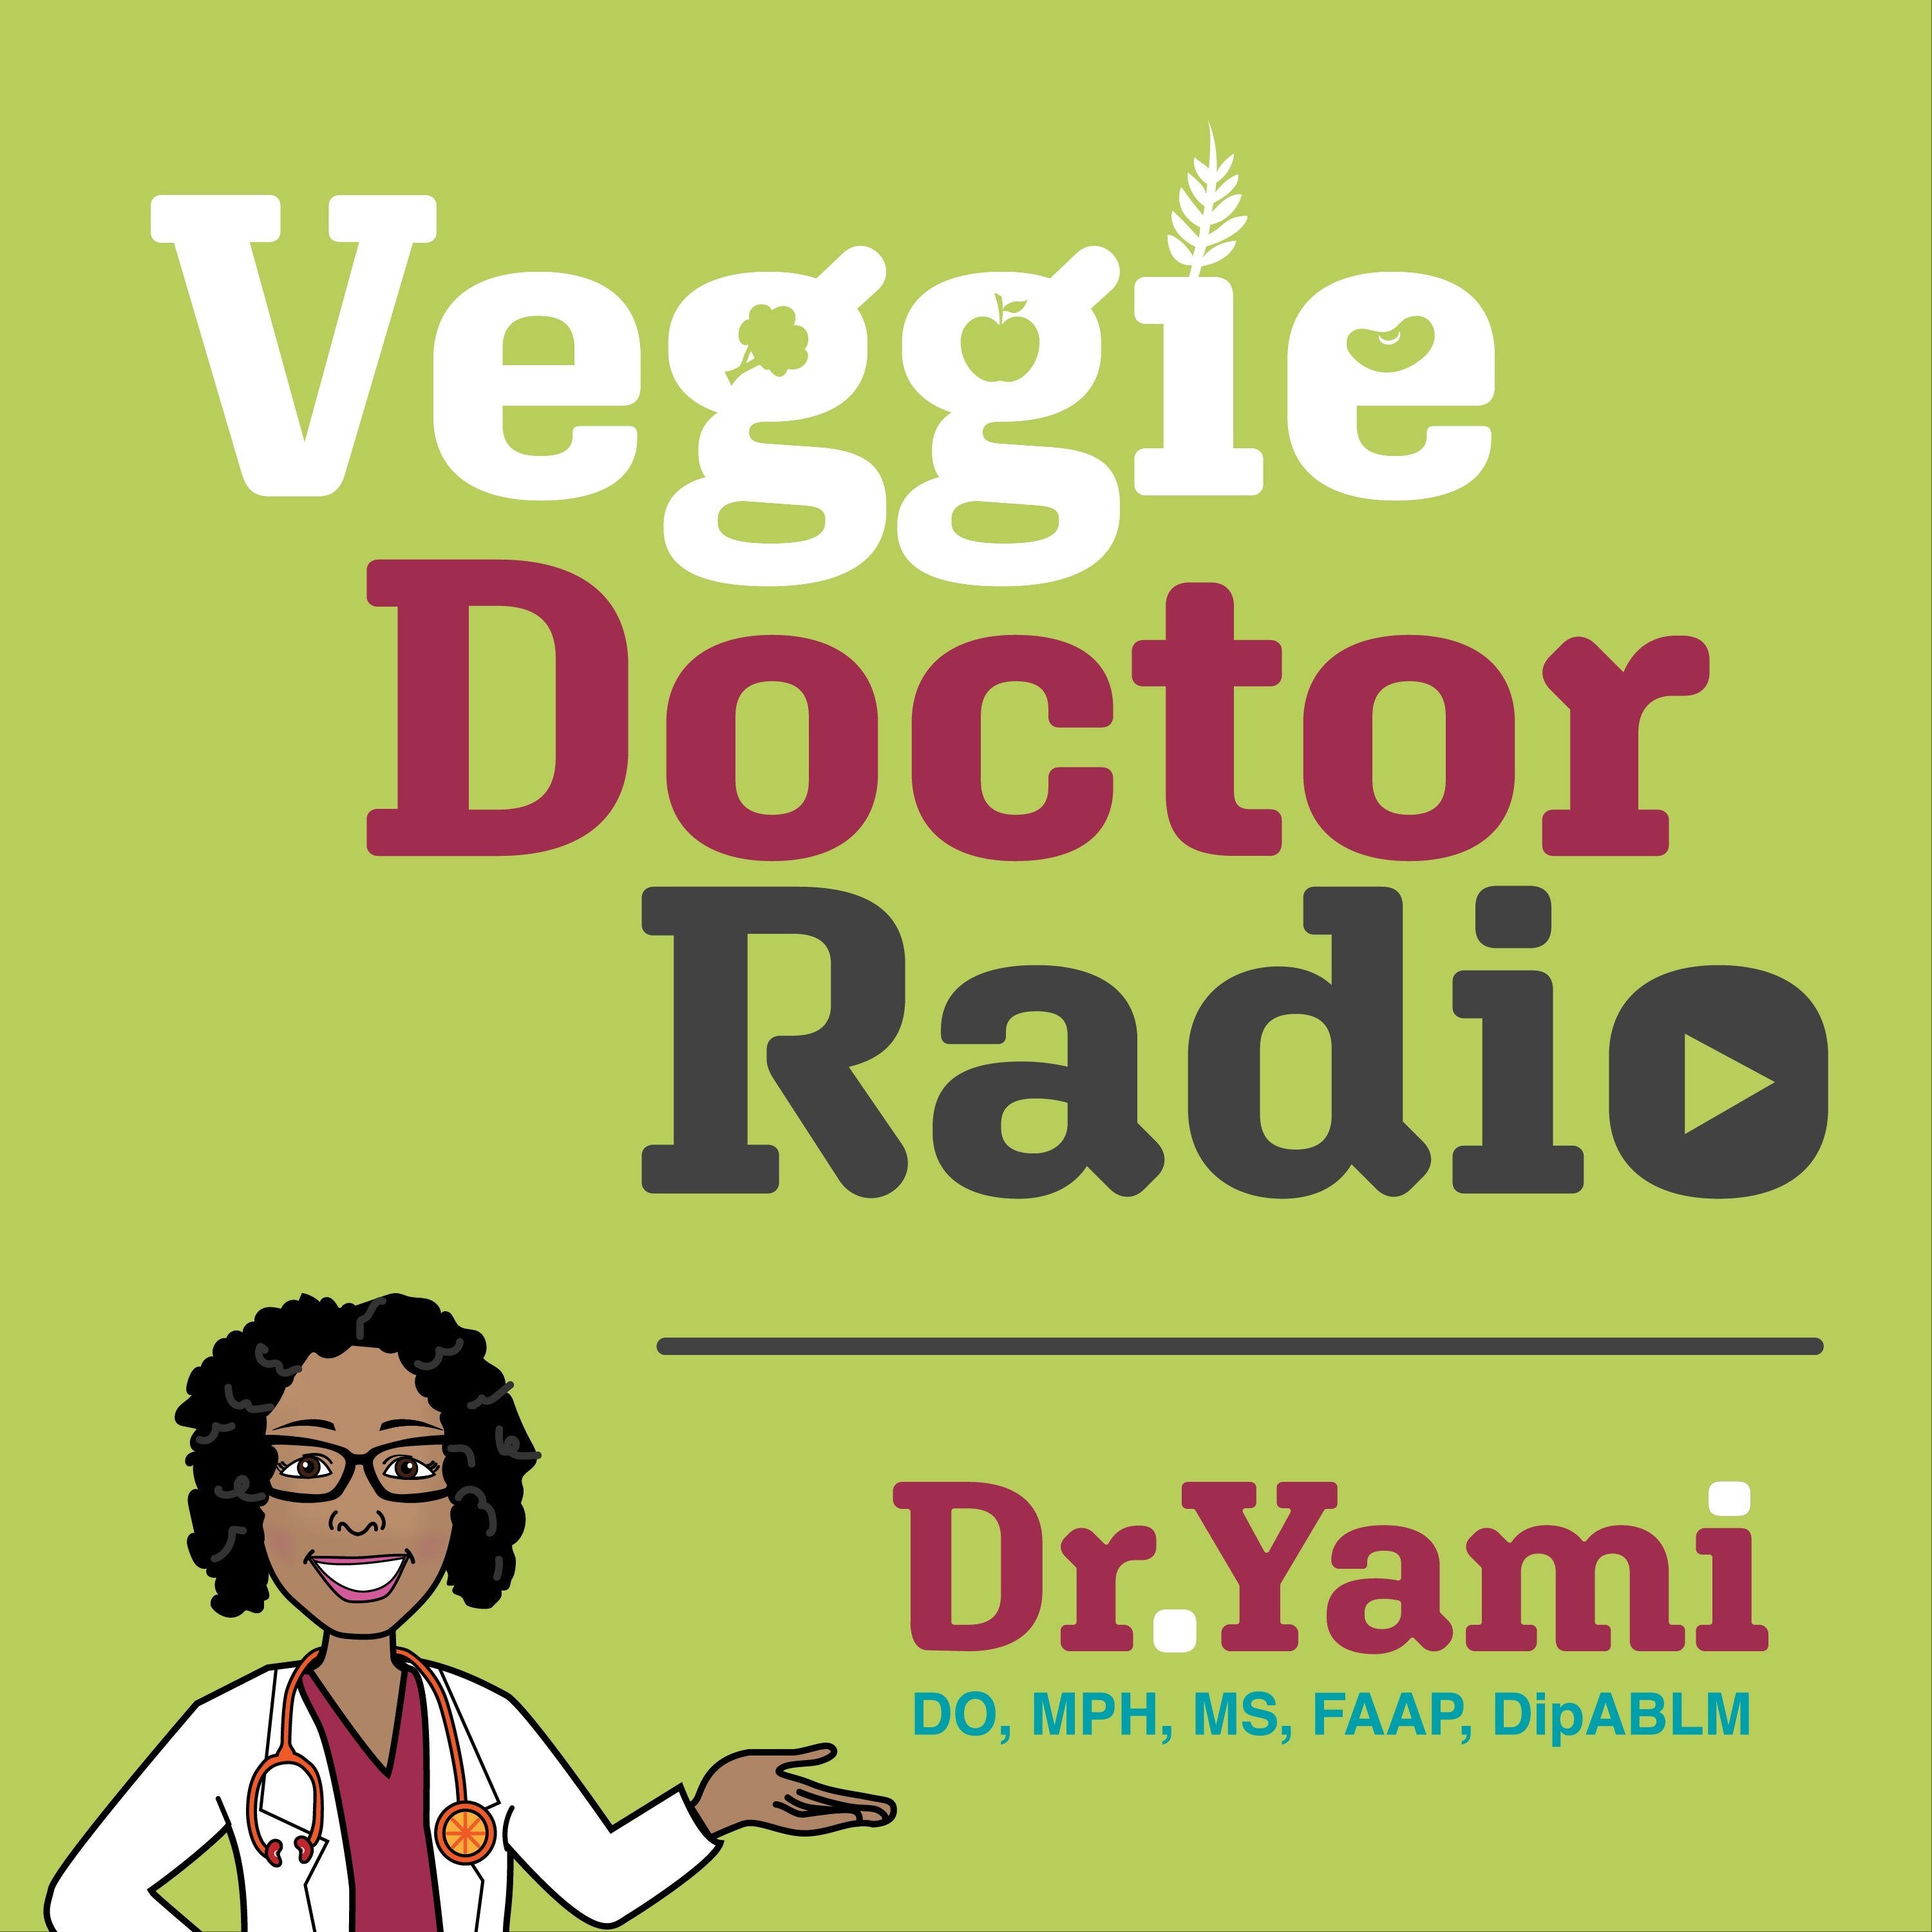 161: Why you should be eating whole grains (Veggie Doctor Radio)